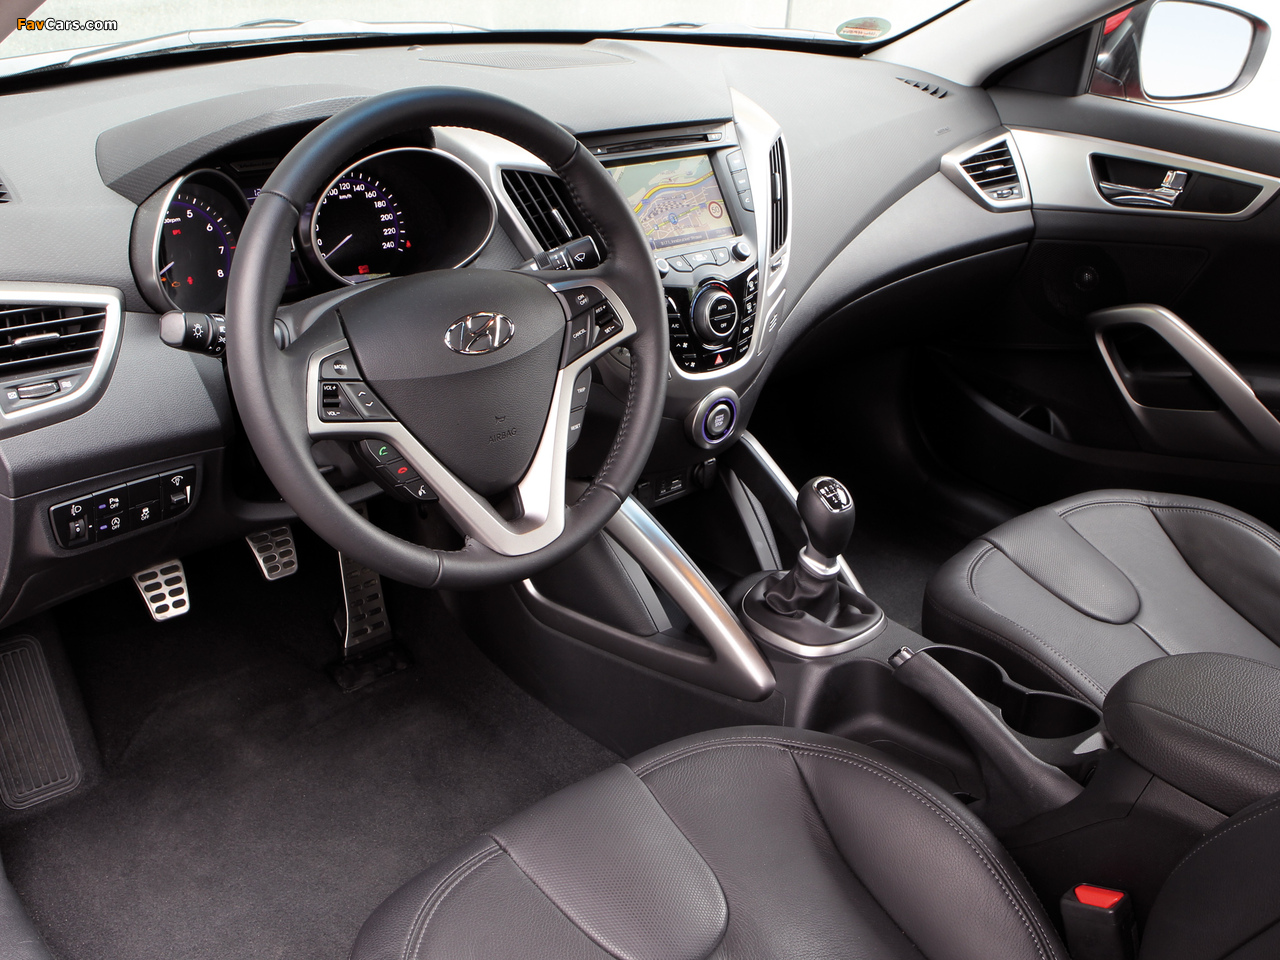 Hyundai Veloster 2011 pictures (1280 x 960)